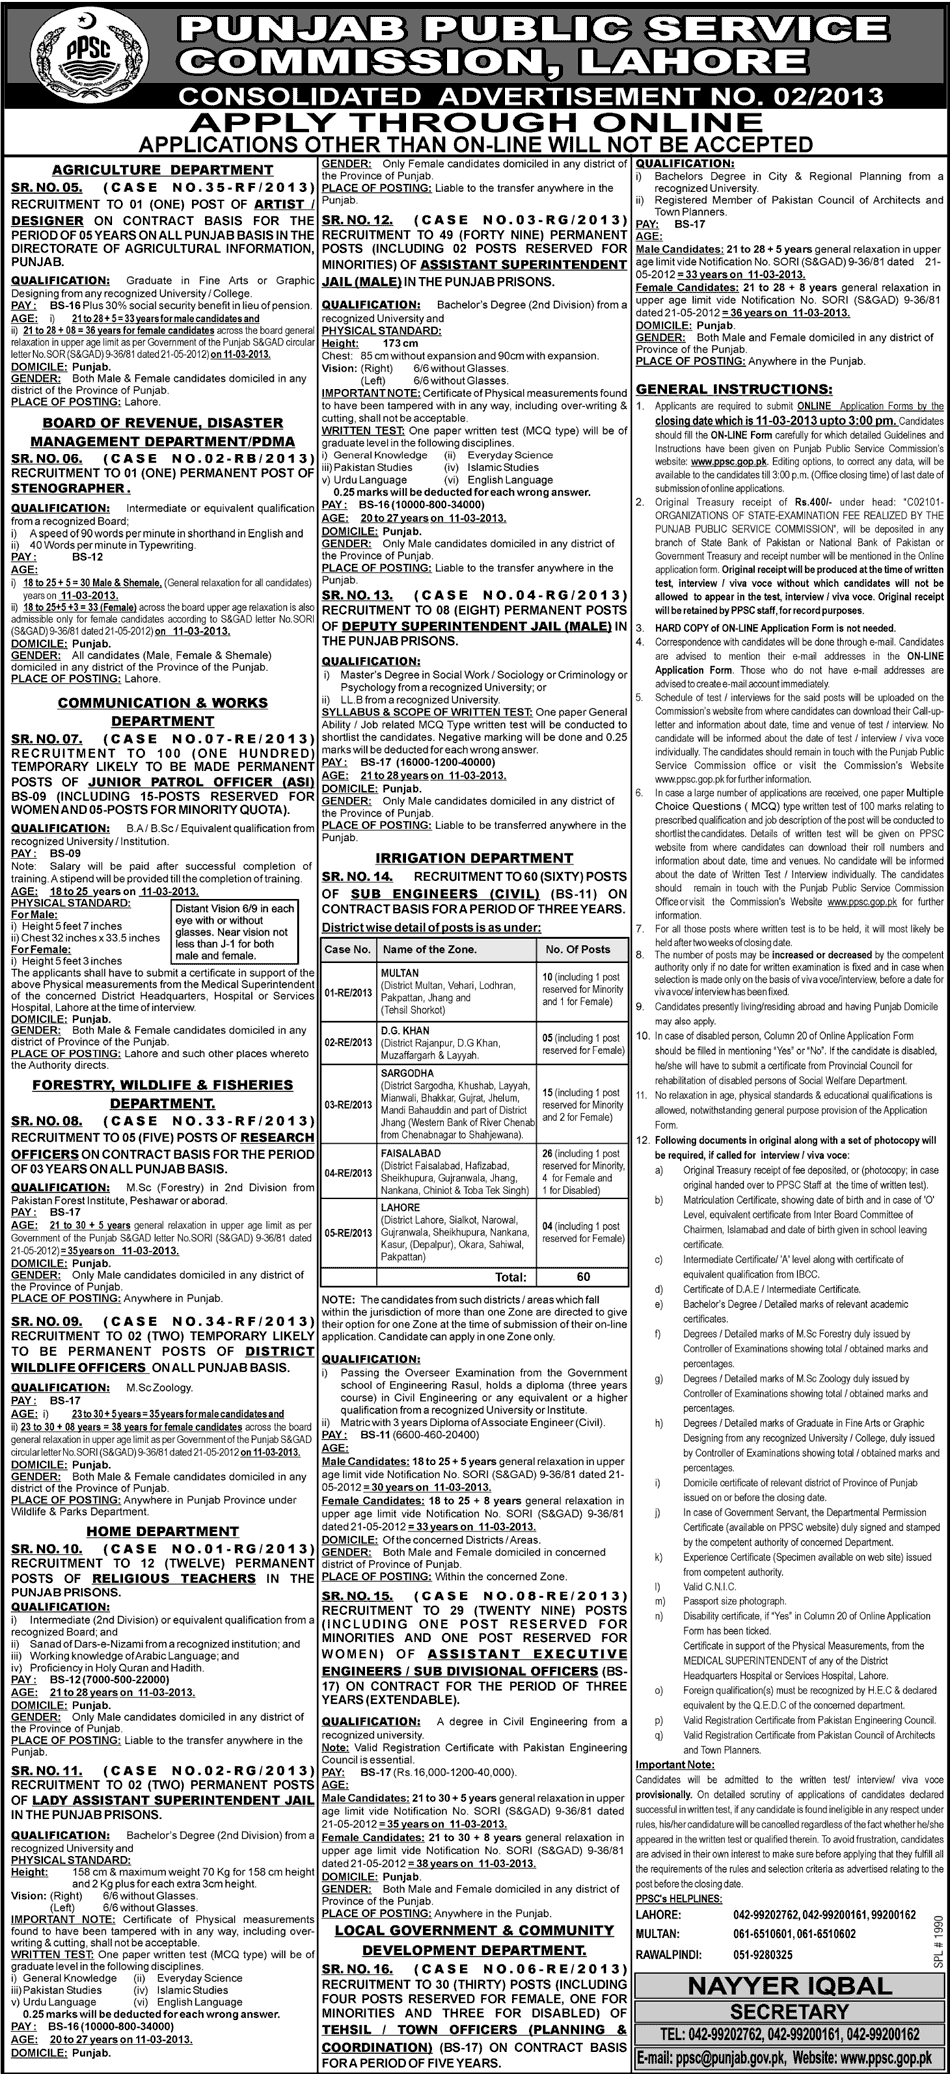 PPSC Jobs 2013 Application Form / Apply Online